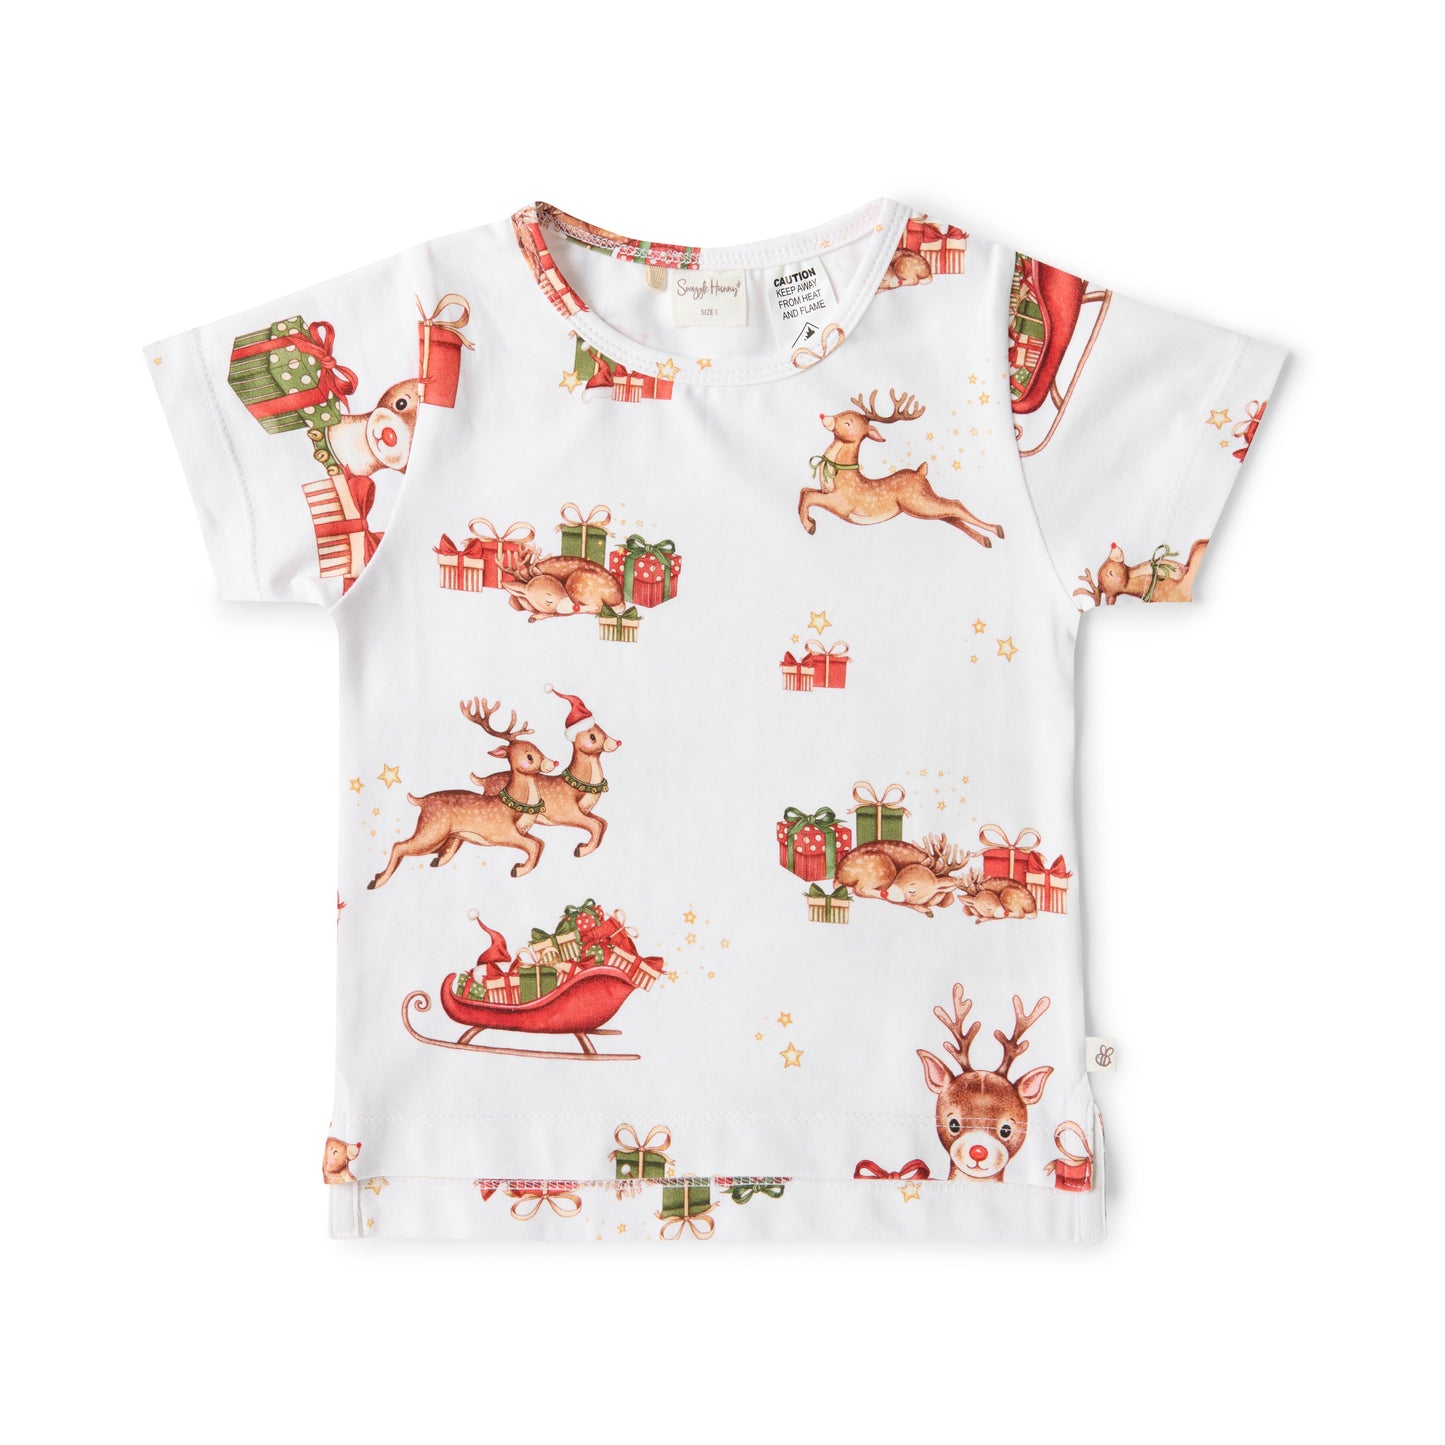 Reindeer relaxed style T-Shirt   Features Include:  Popular Reindeer Print Relaxed style Easy to wear Lightweight and breathable GOTS Certified Organic CU 1182228 95% Organic Cotton / 5% Elastane